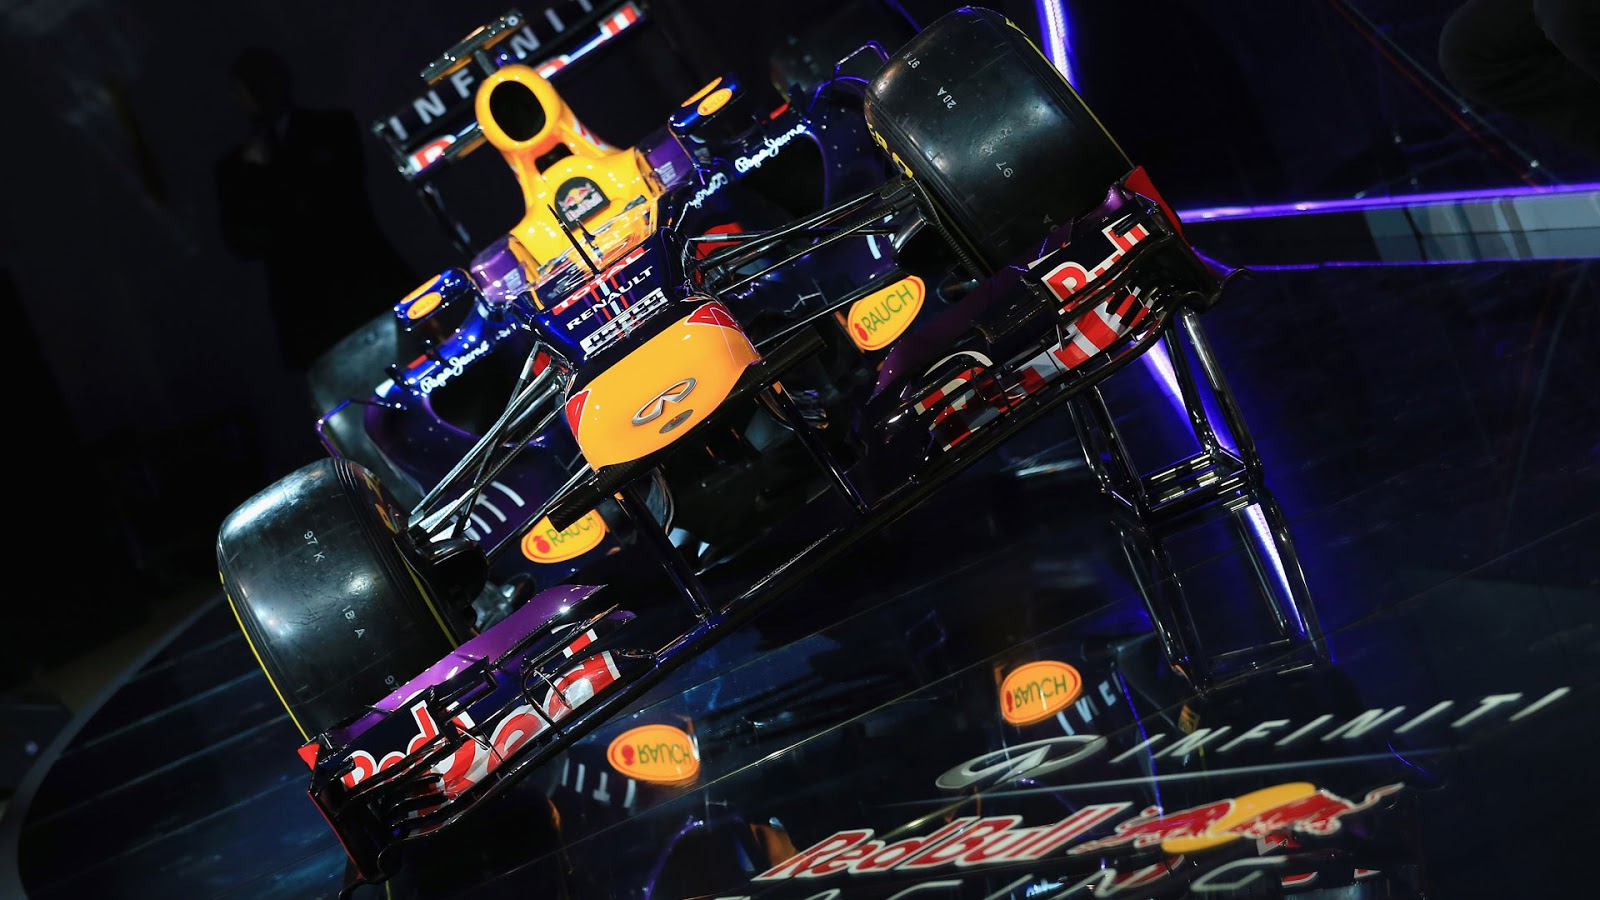 Free Download Red Bull Racing Wallpapers 1024x768 For Your Desktop Mobile And Tablet Explore